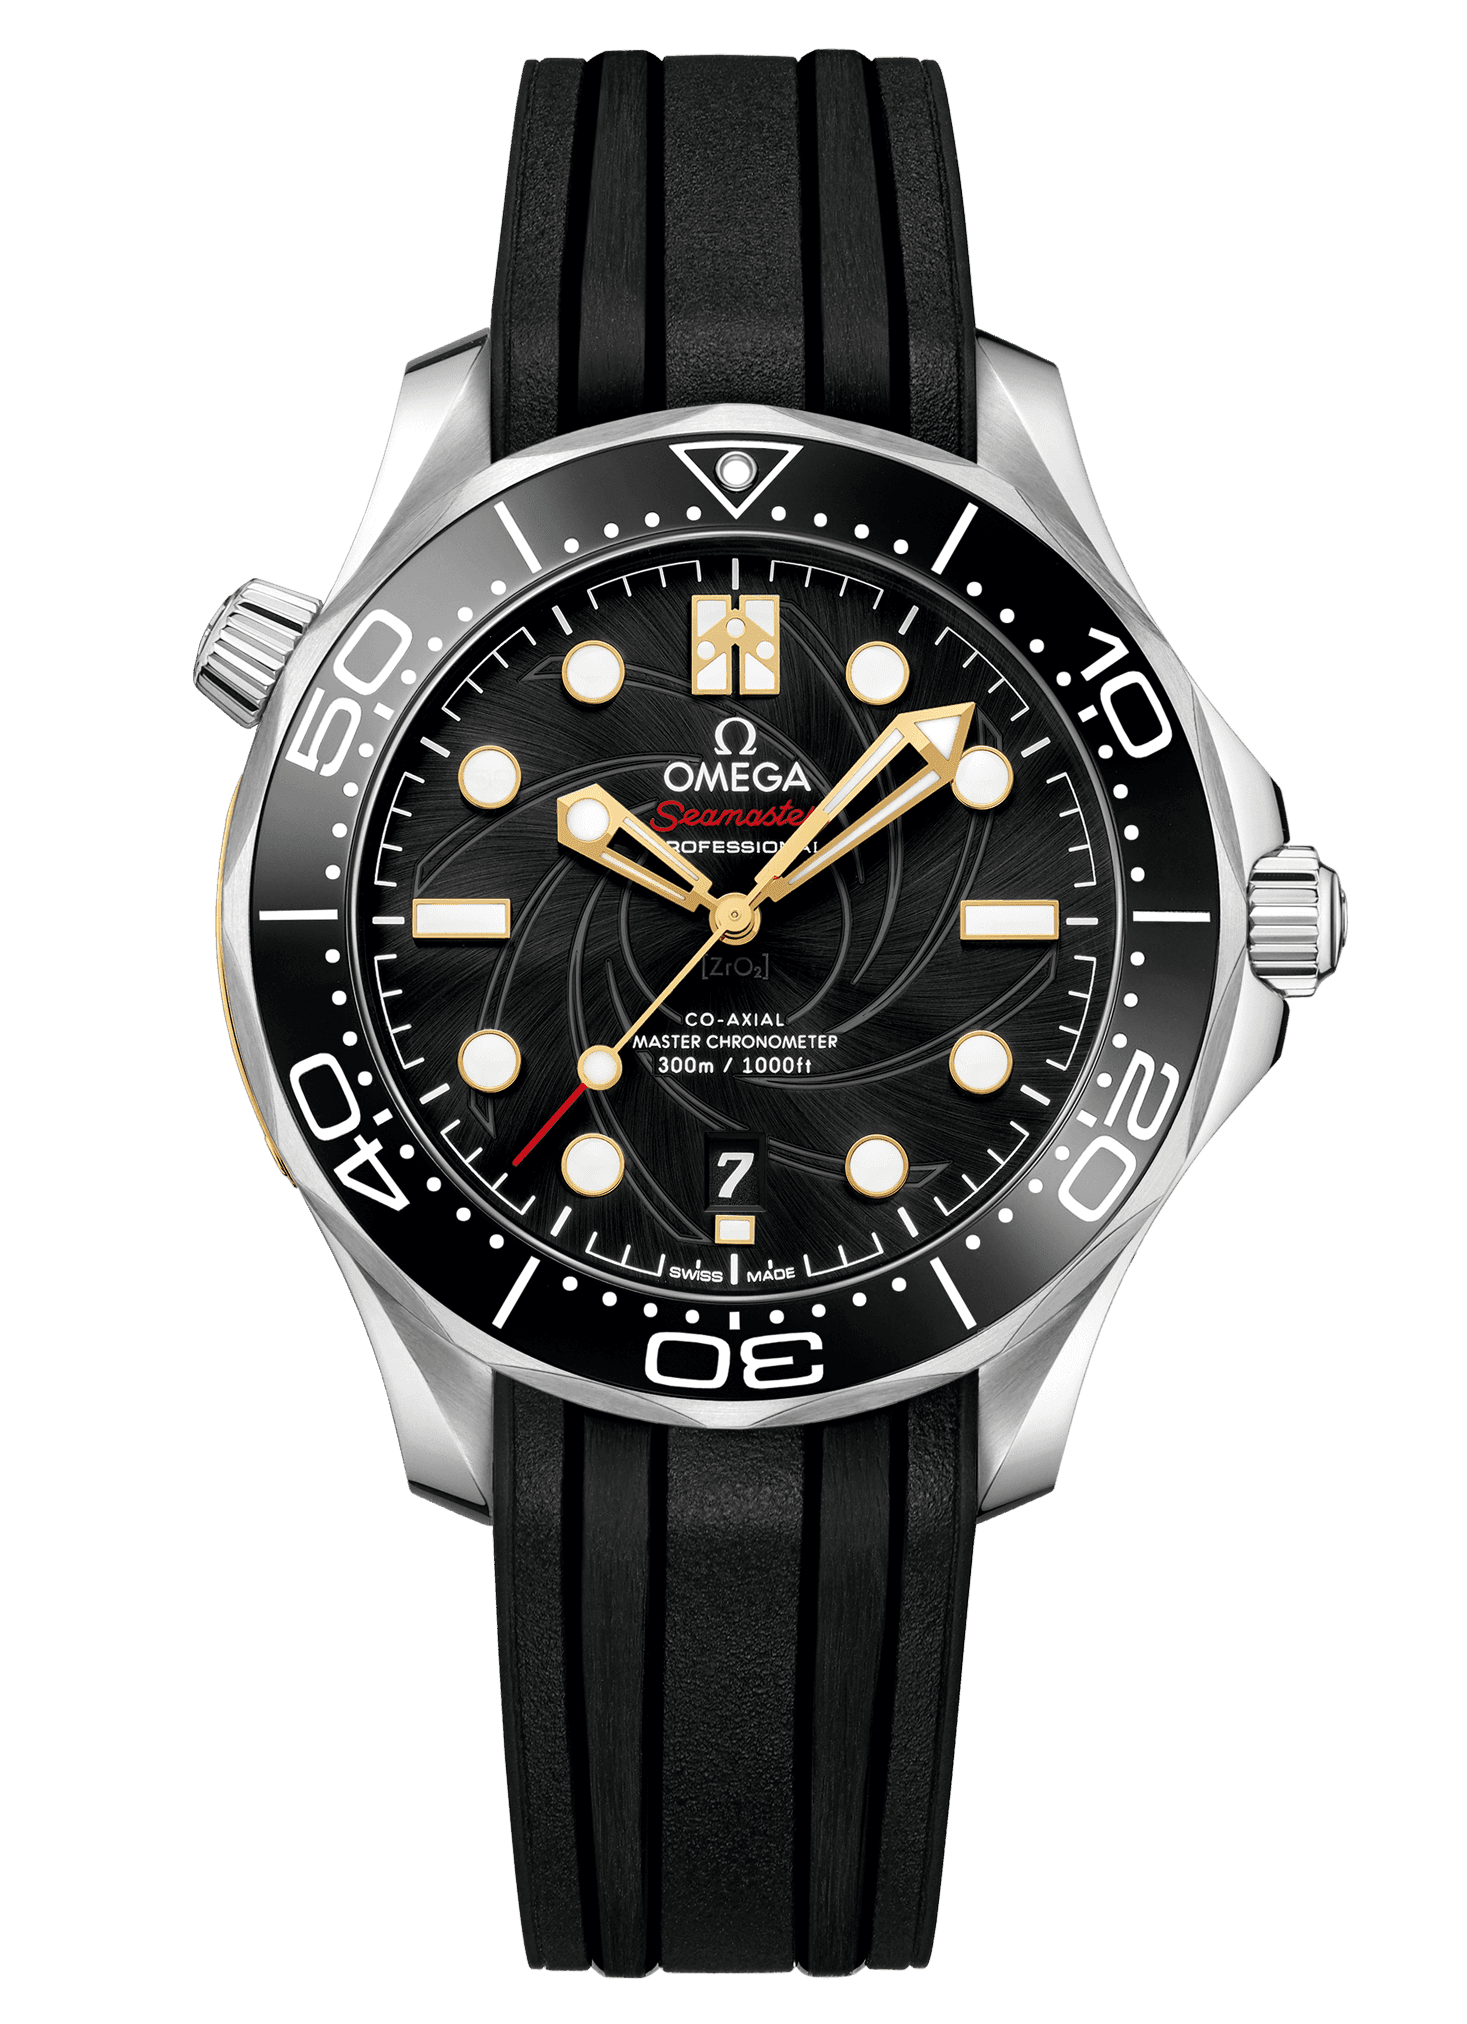 James Bond Watches - Seamaster 300 SPECTRE limited edition from Spectre (2015)